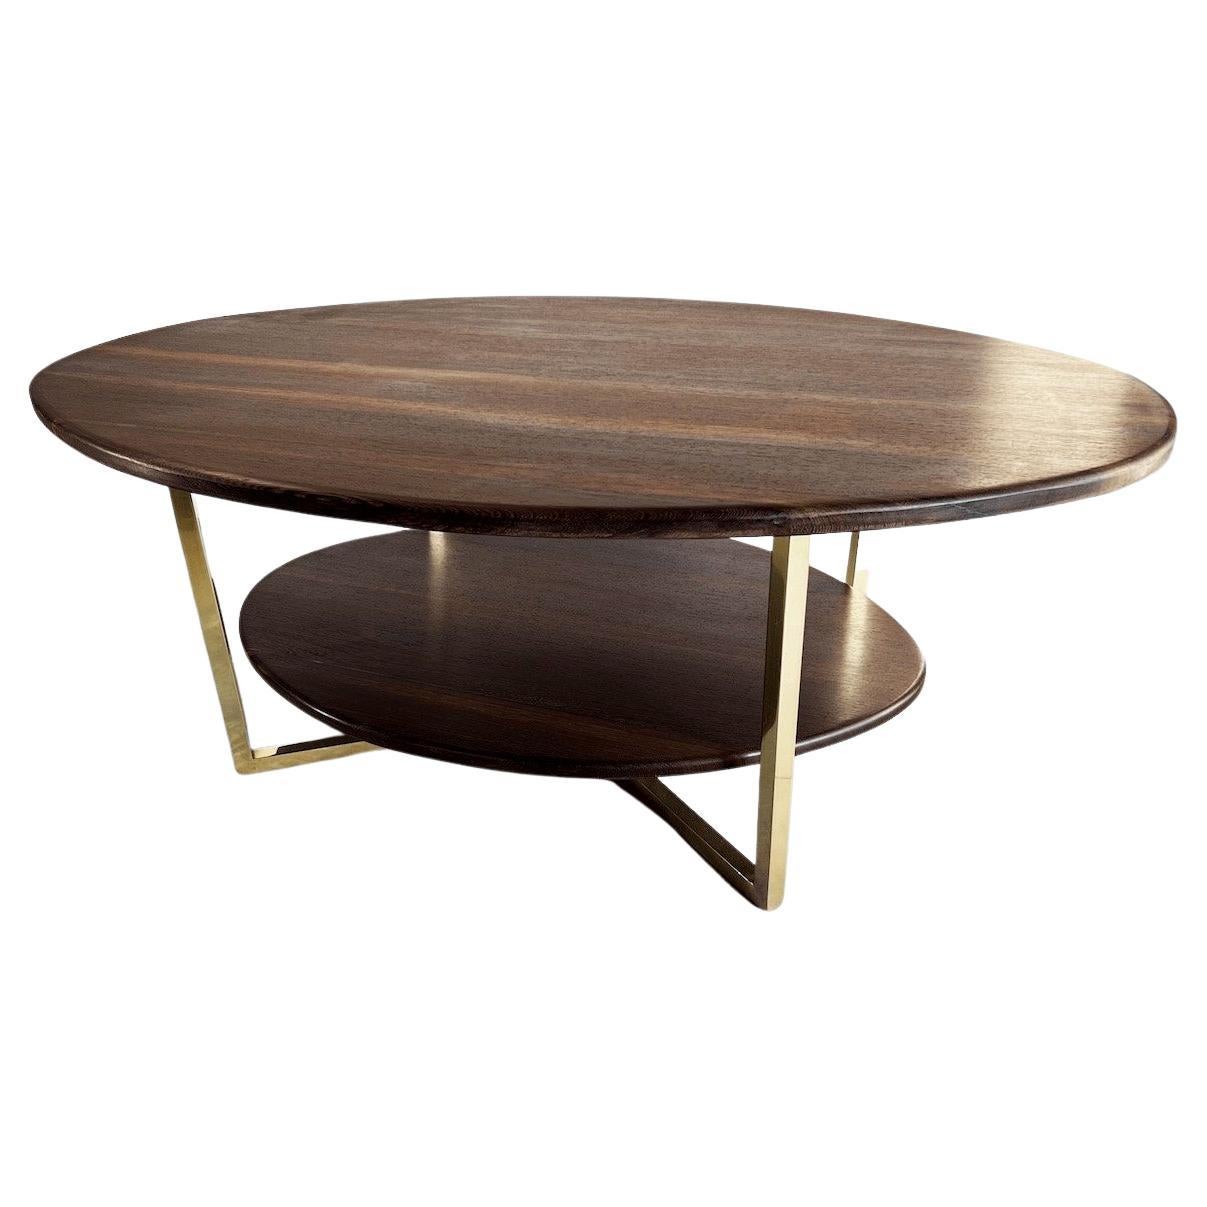 Safari by Seve Quantum Design 'France', Wenge & Brass Coffee Table